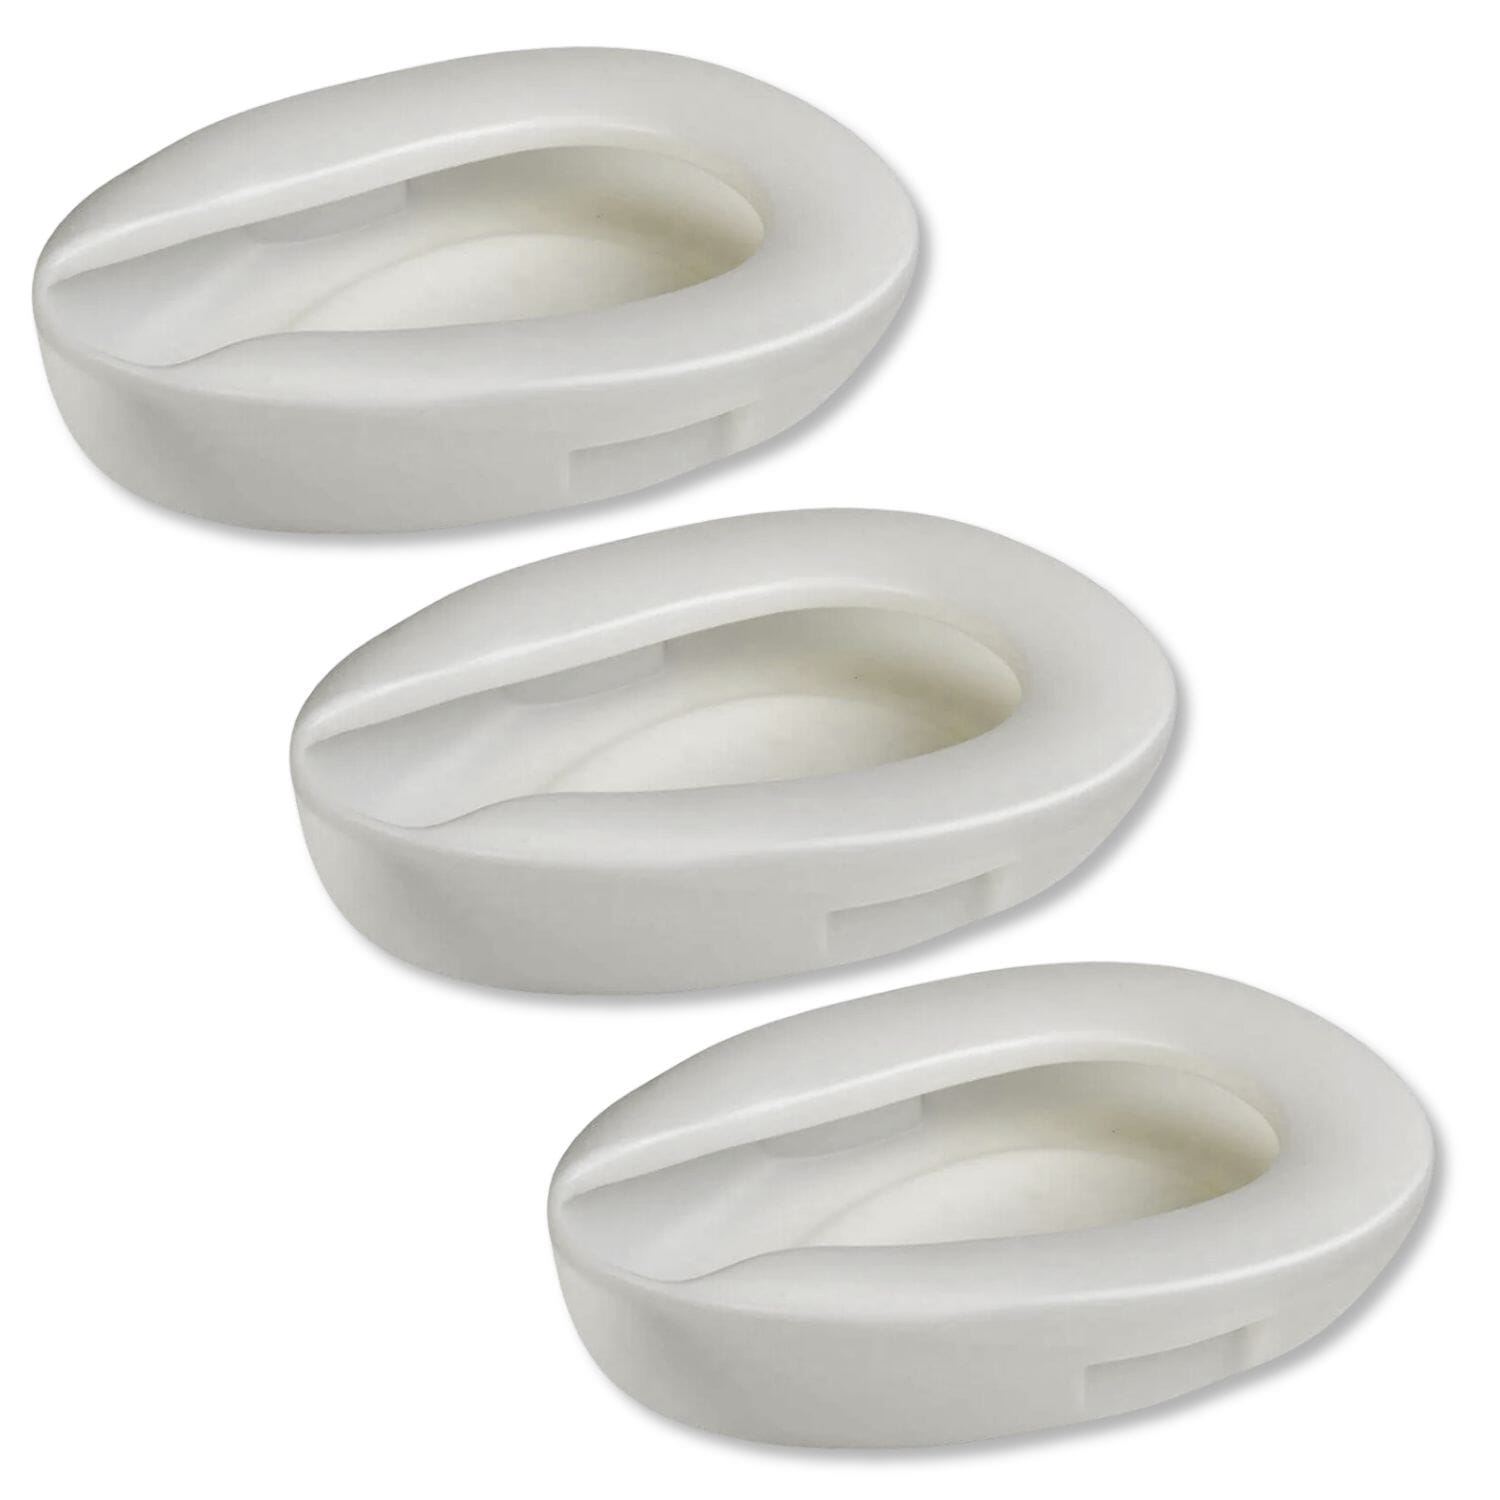 View Economy Bed Pan Pack of 3 information